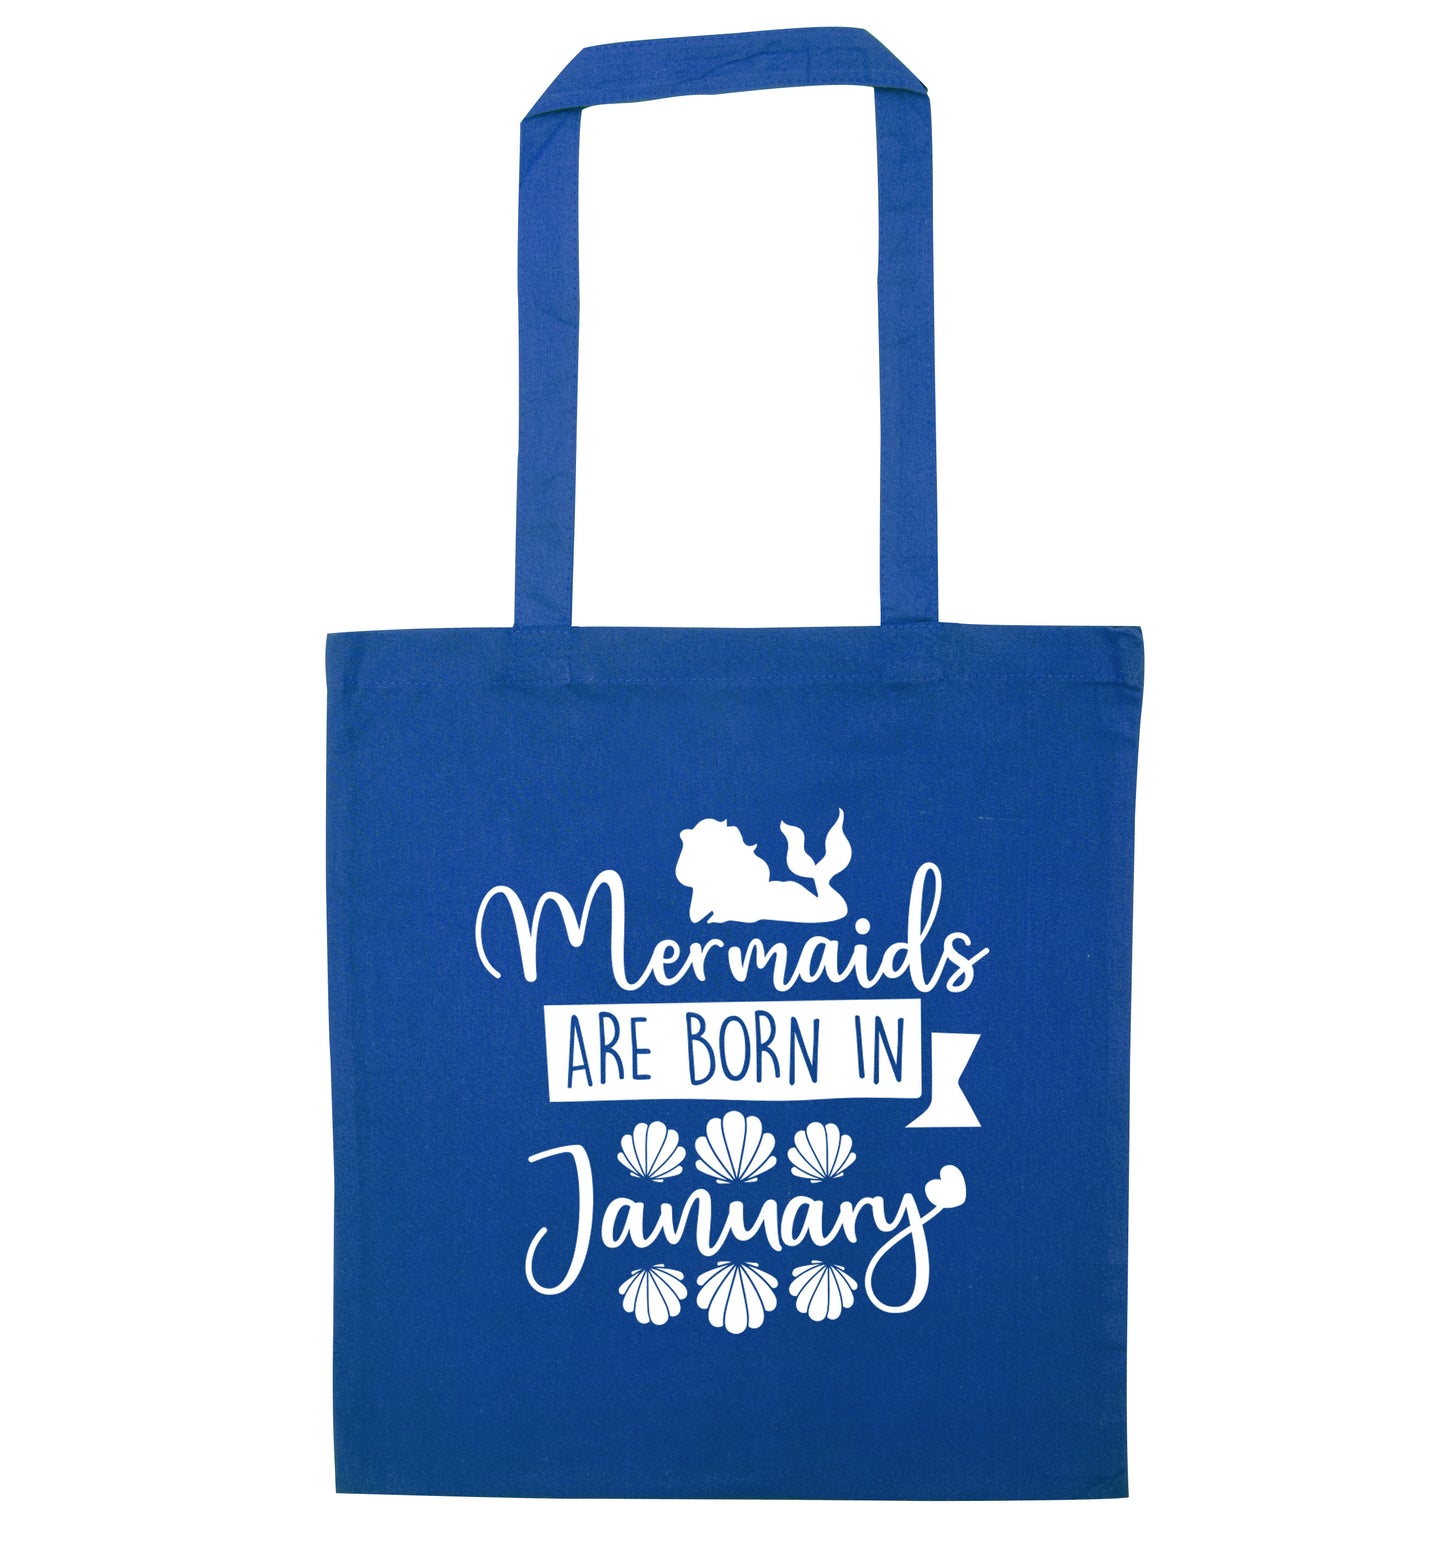 Mermaids are born in January blue tote bag